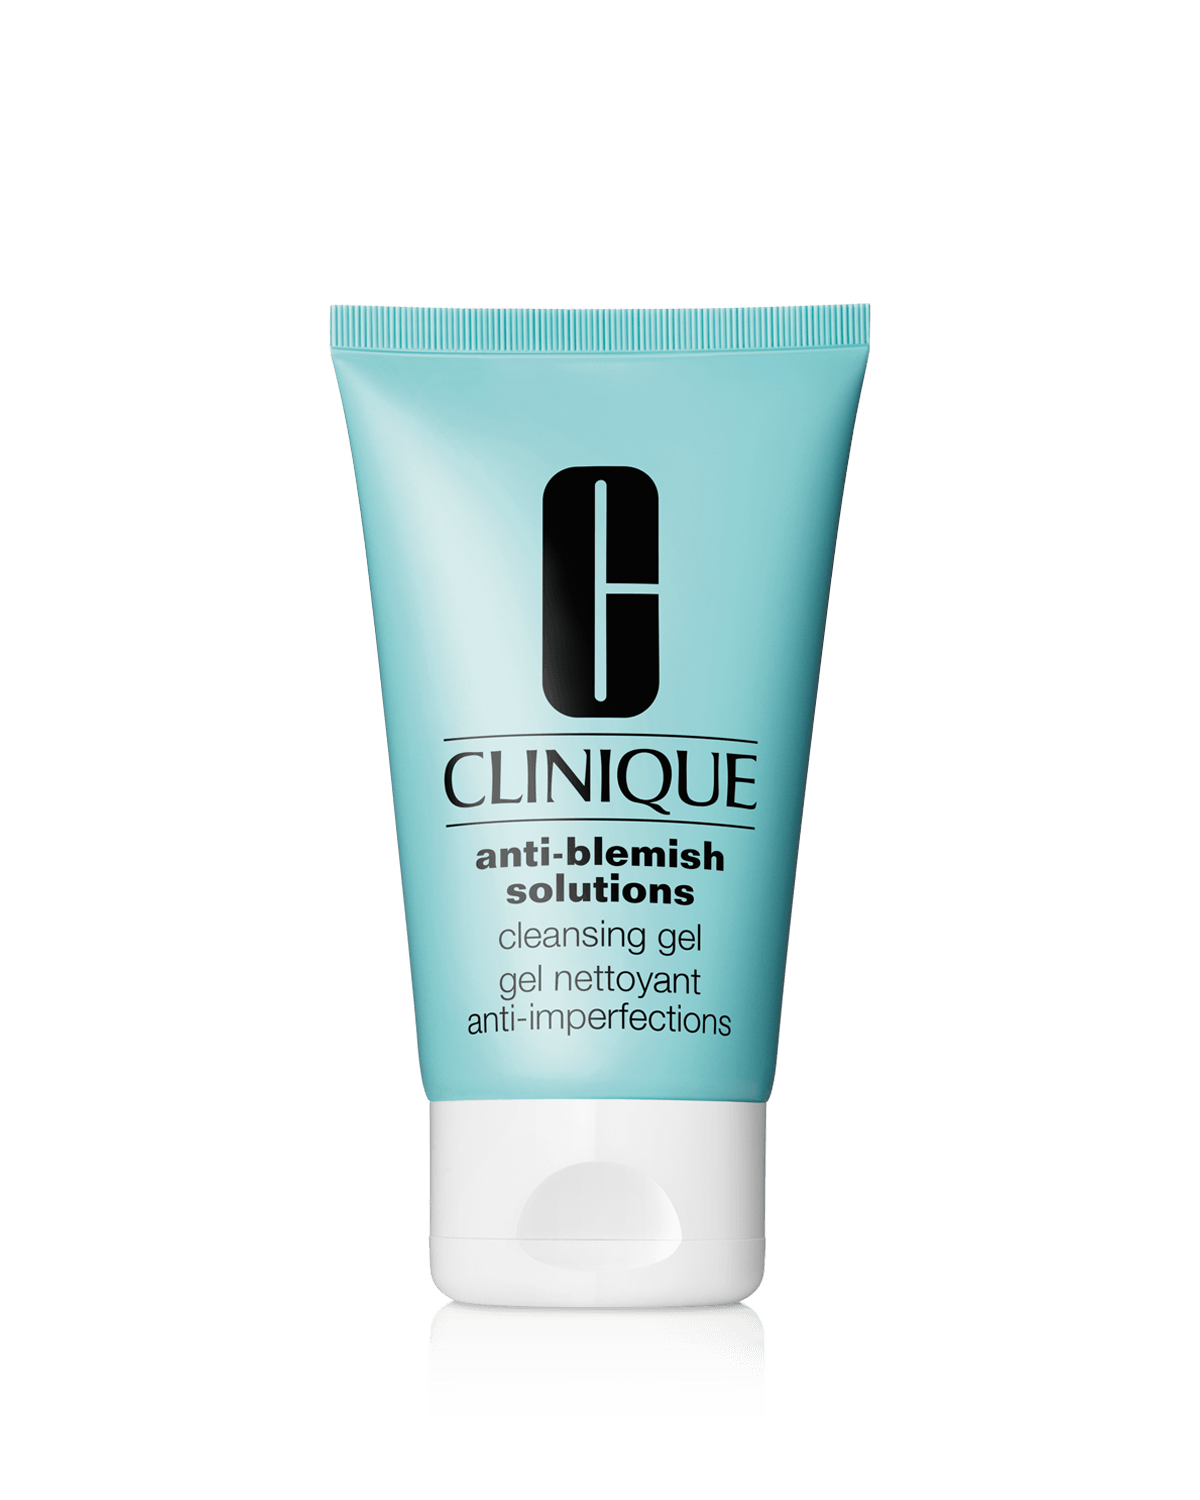 Anti-Blemish Solutions Clearing Gel